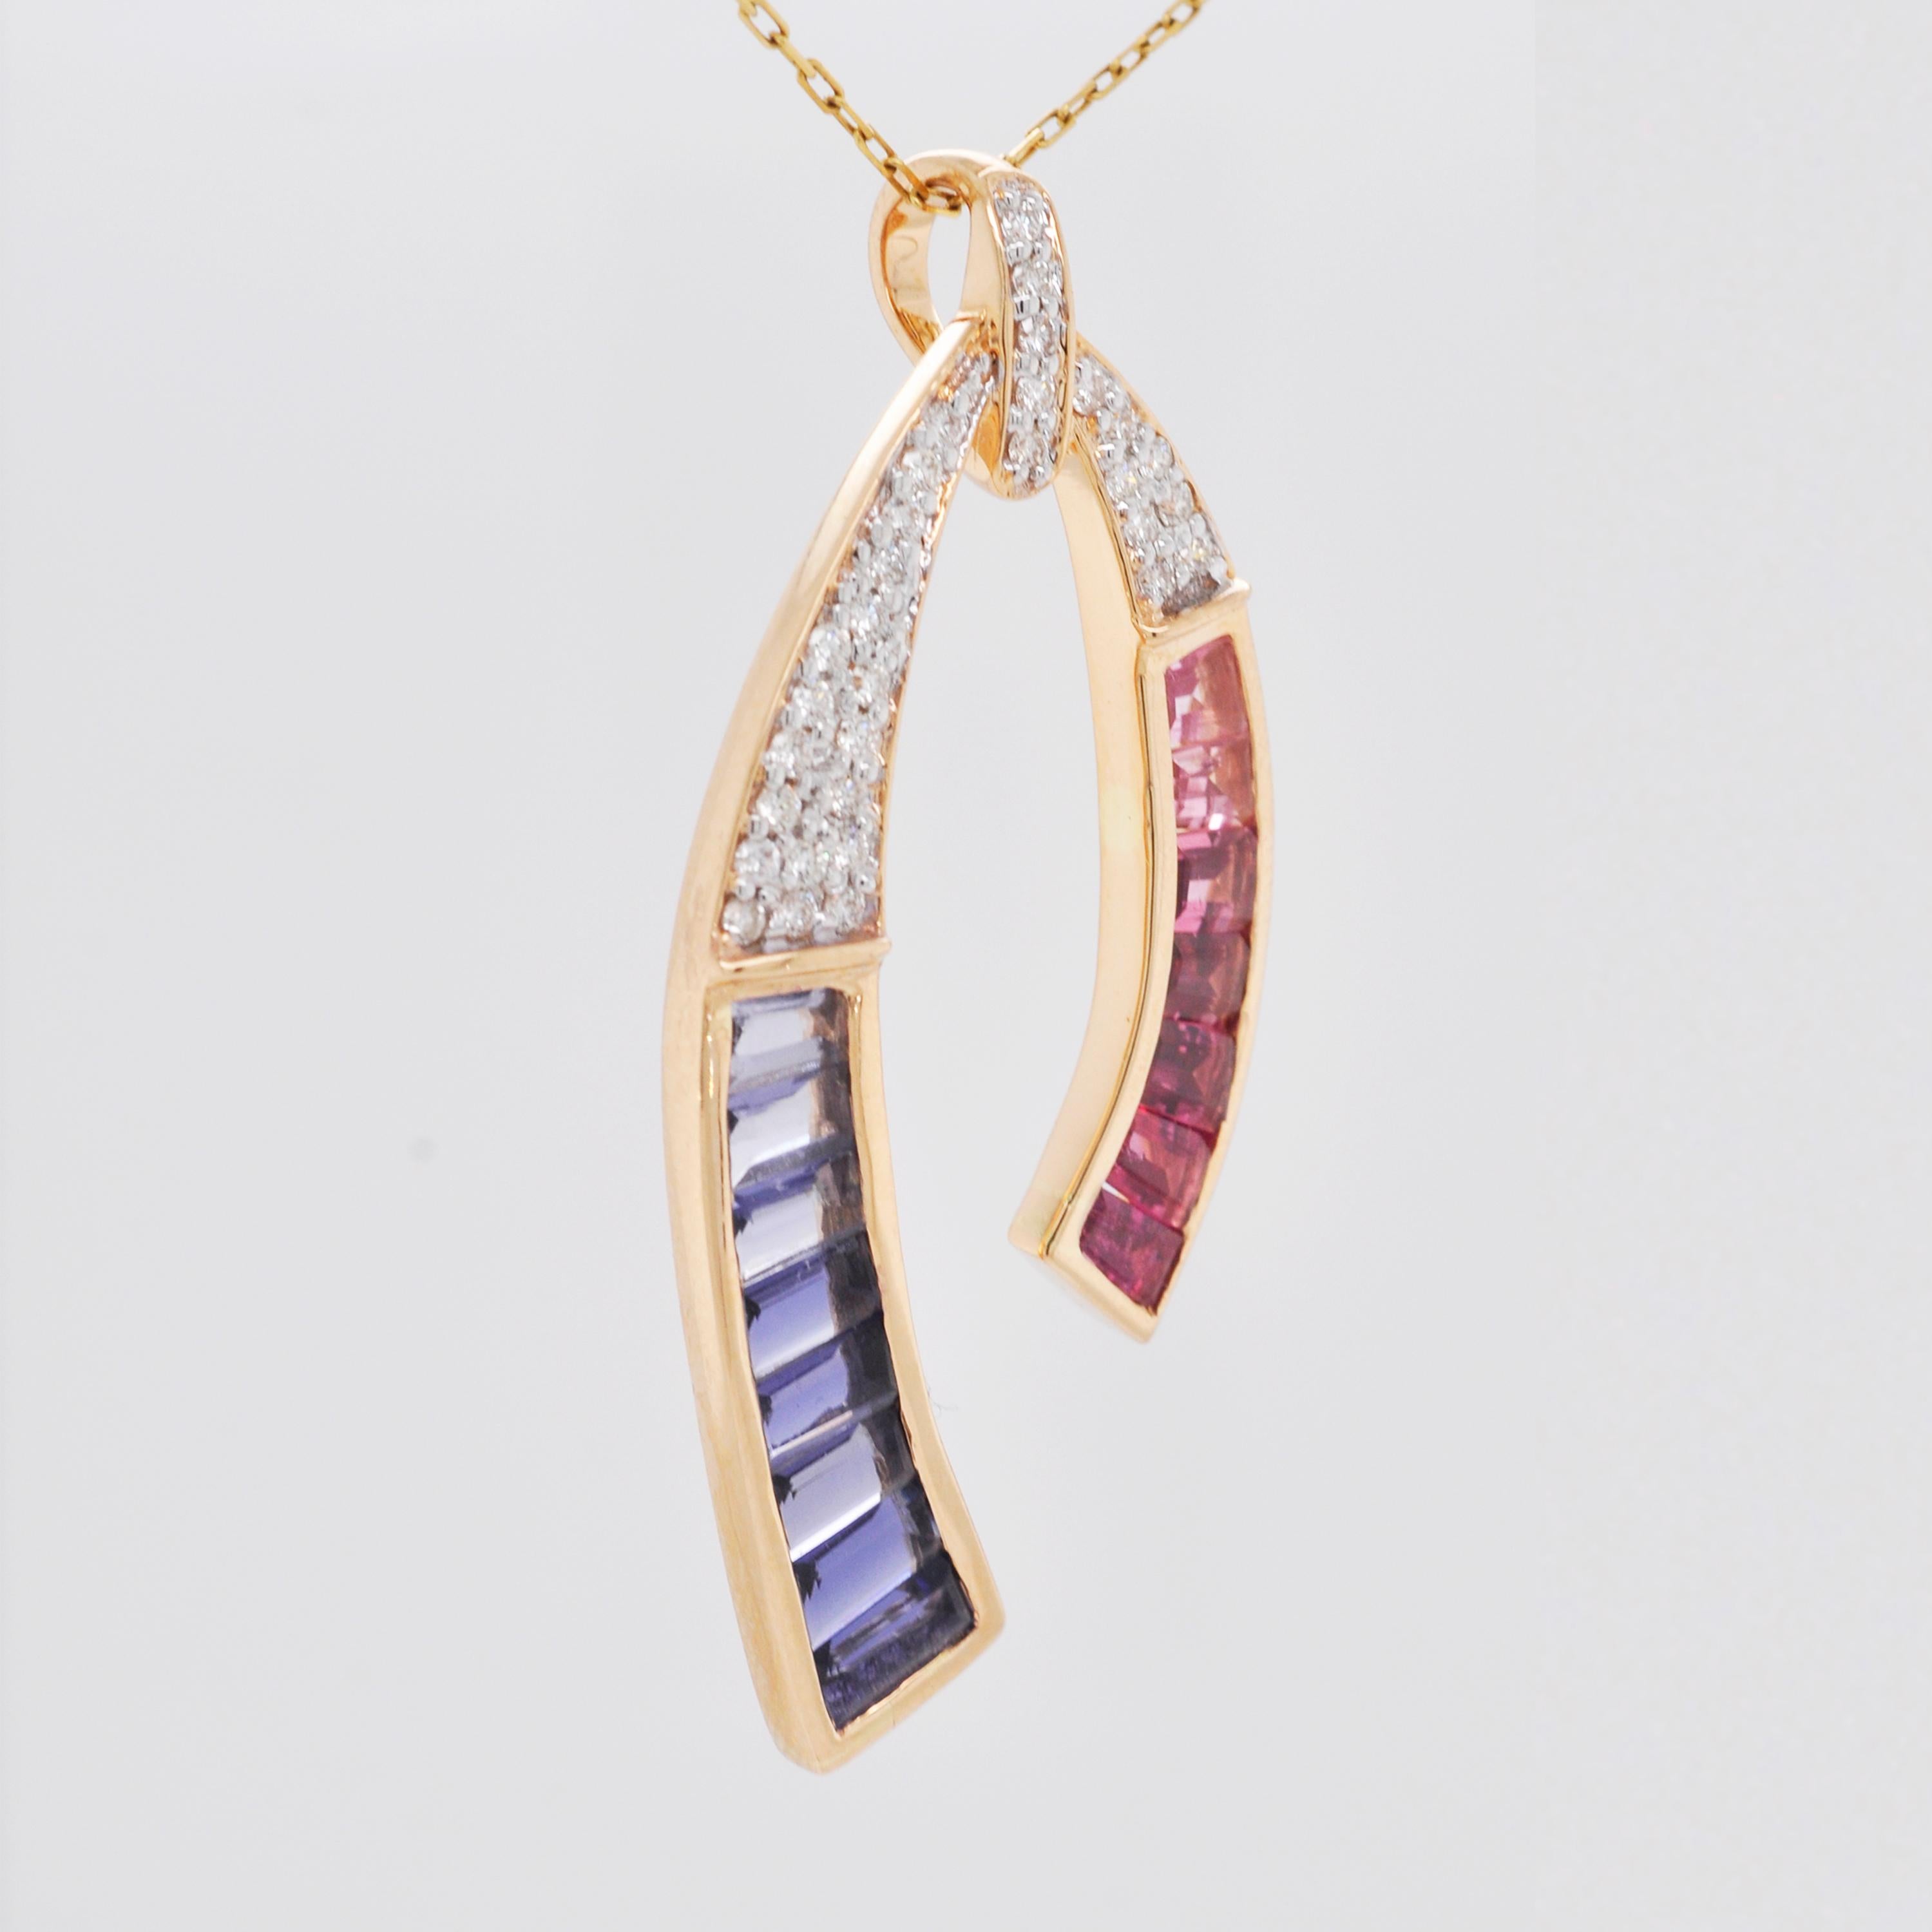 18 Karat Yellow Gold Pink Tourmaline Iolite Baguette Diamond Pendant Necklace In New Condition For Sale In Jaipur, Rajasthan